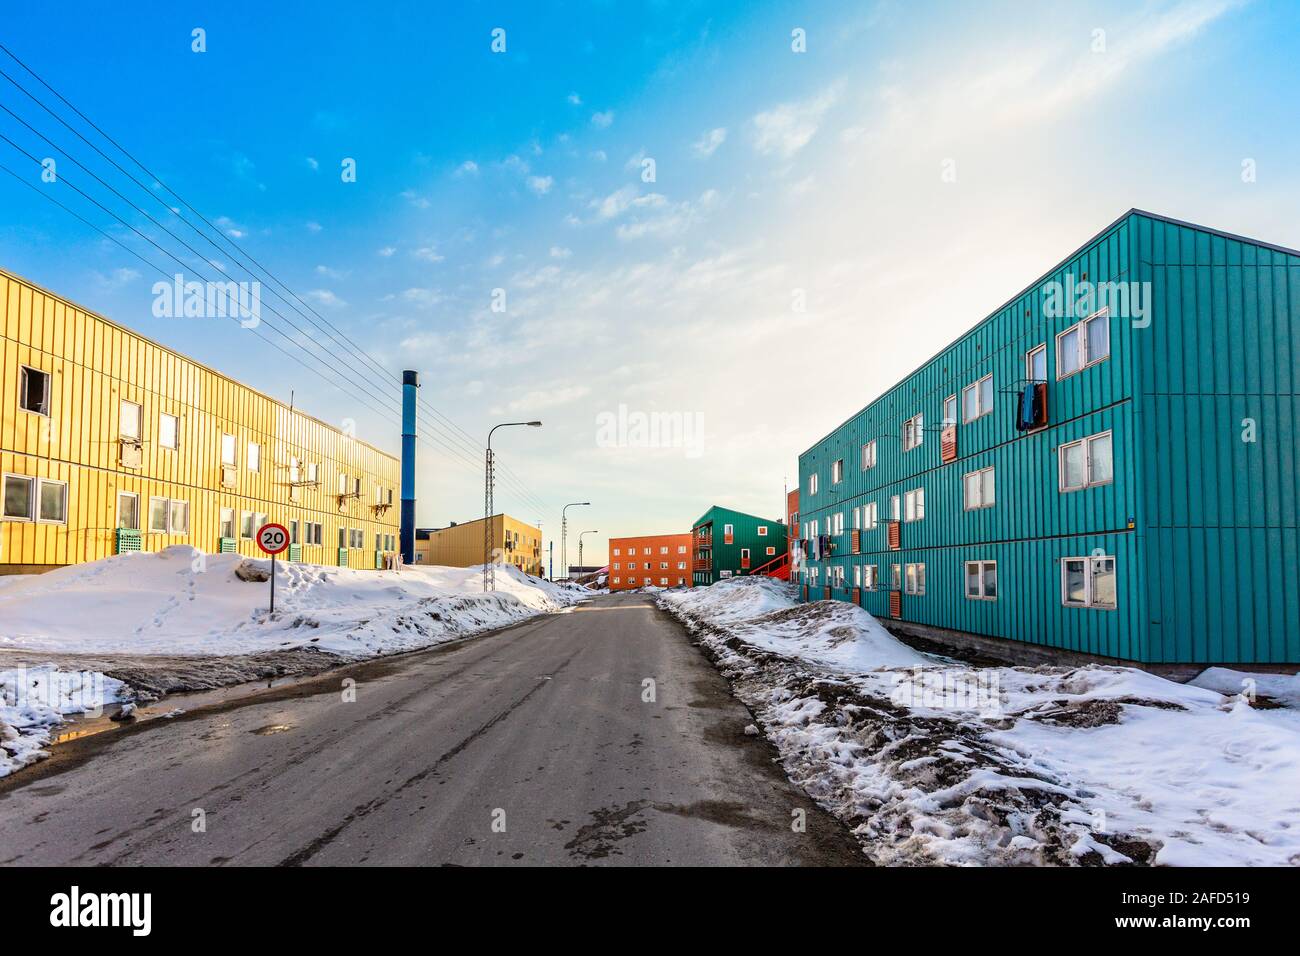 Muddy road with snow and living blocks with long low buildings in  Ilulissat city, Greenland Stock Photo